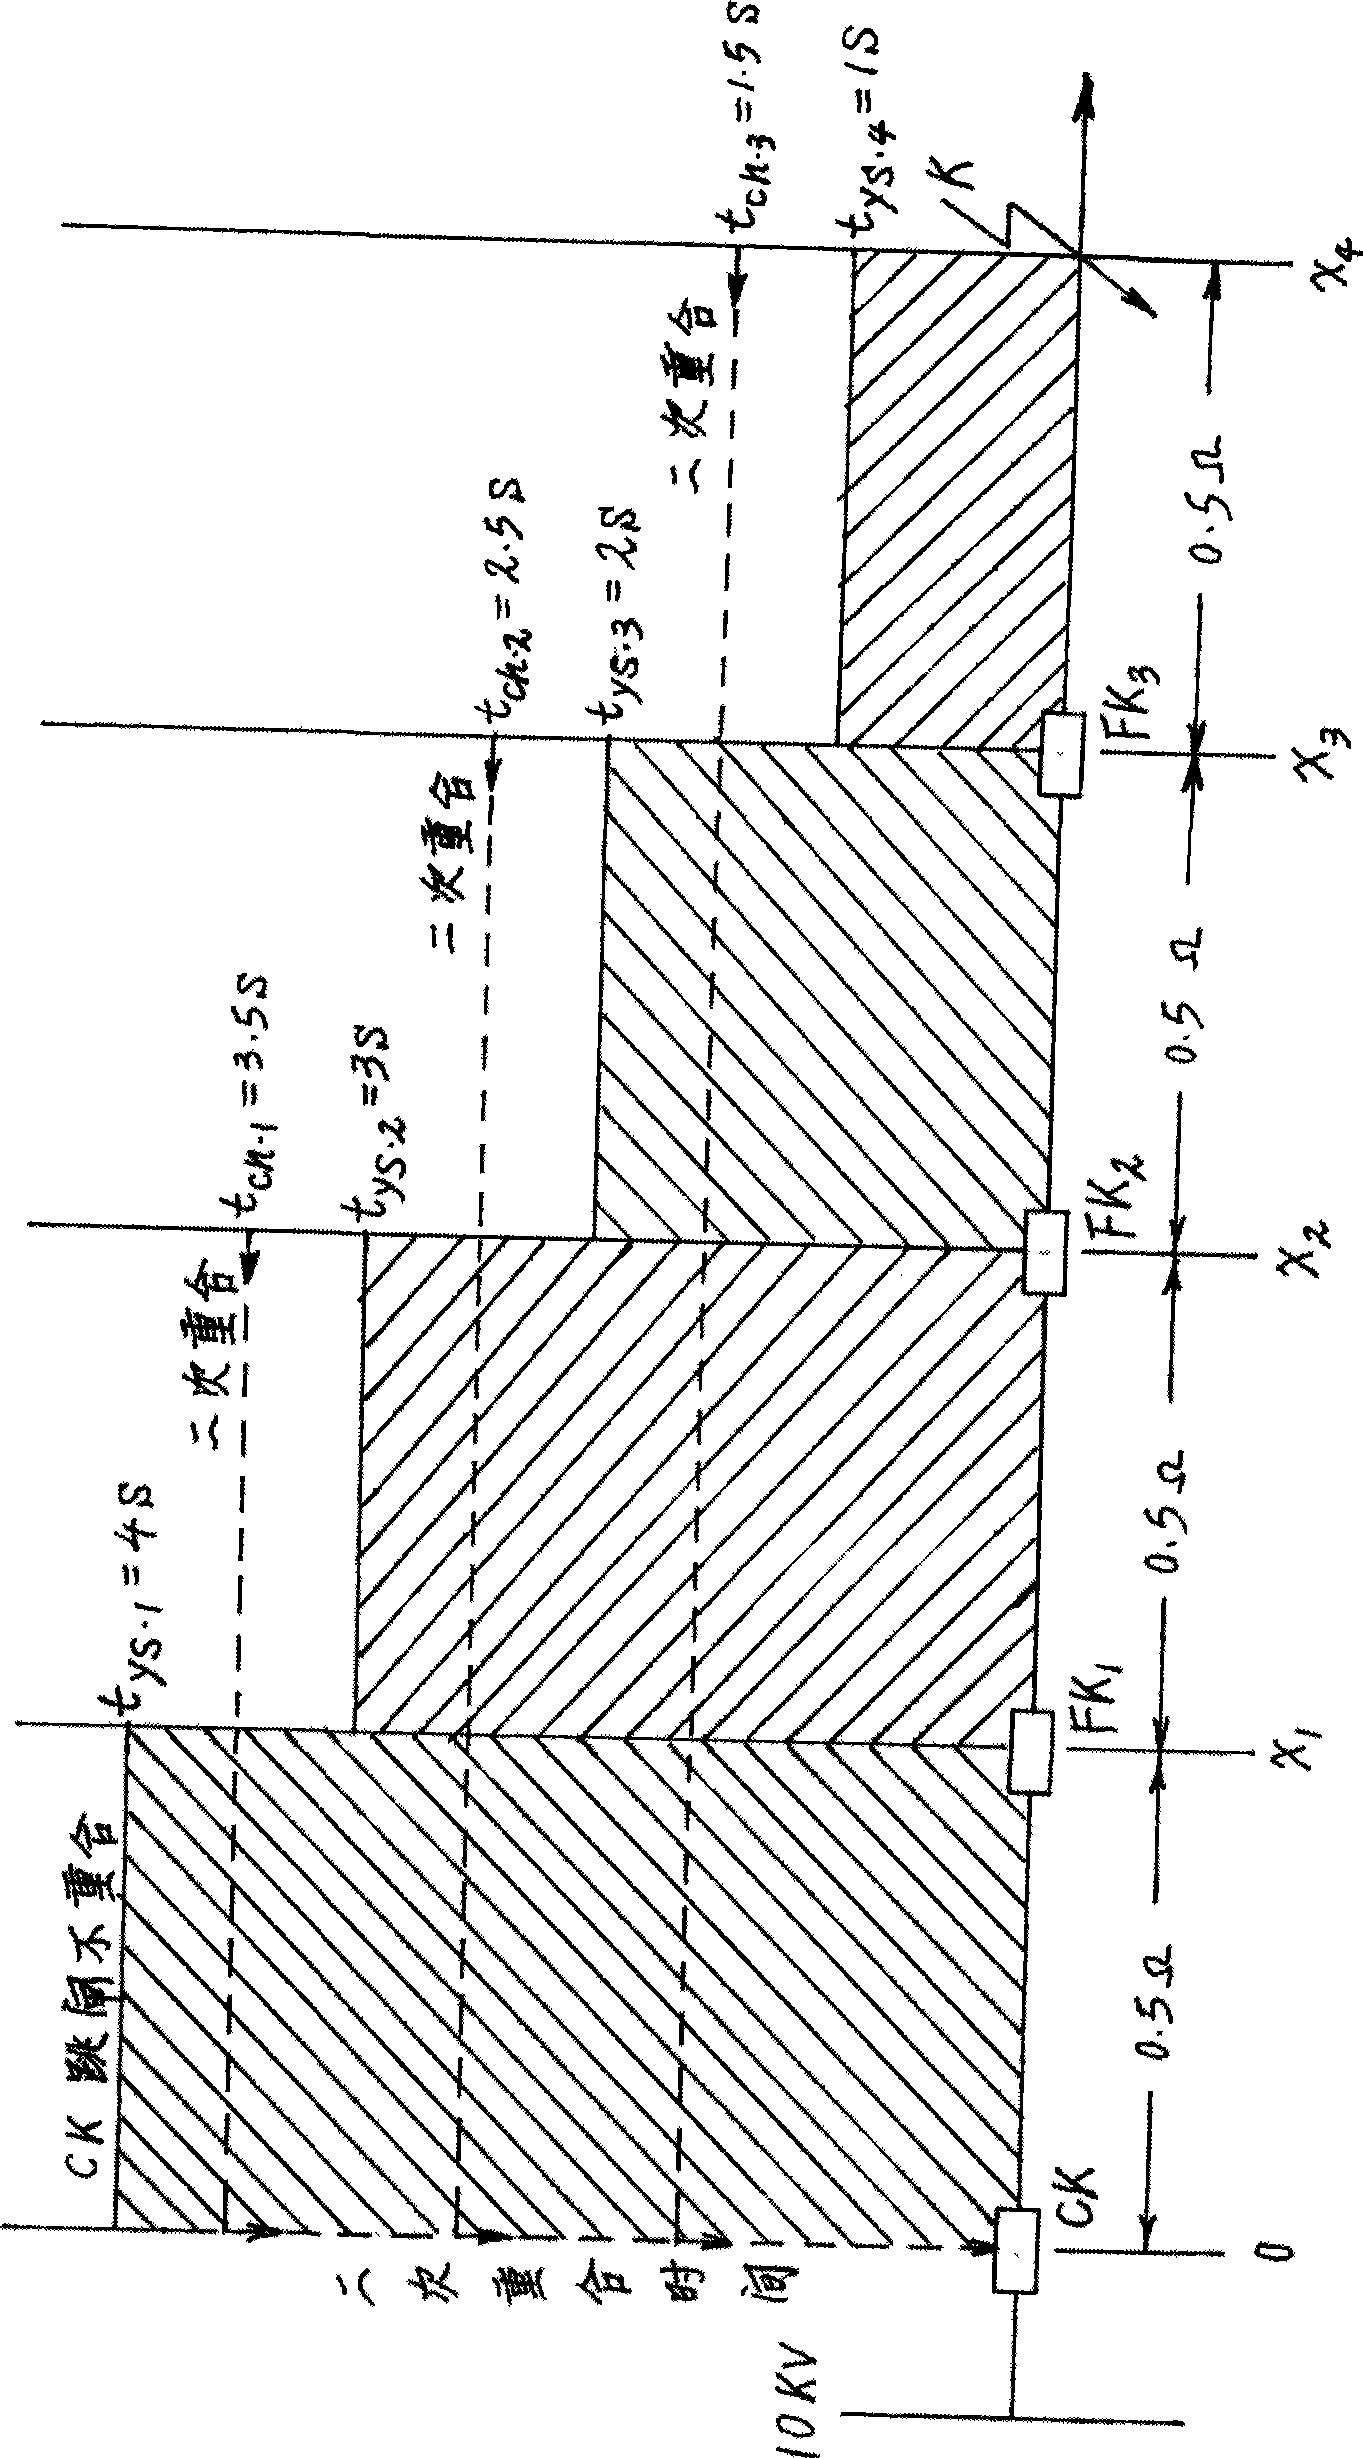 Method for detecting distribution network short circuit fault and restoring power supply in non-broken-down section